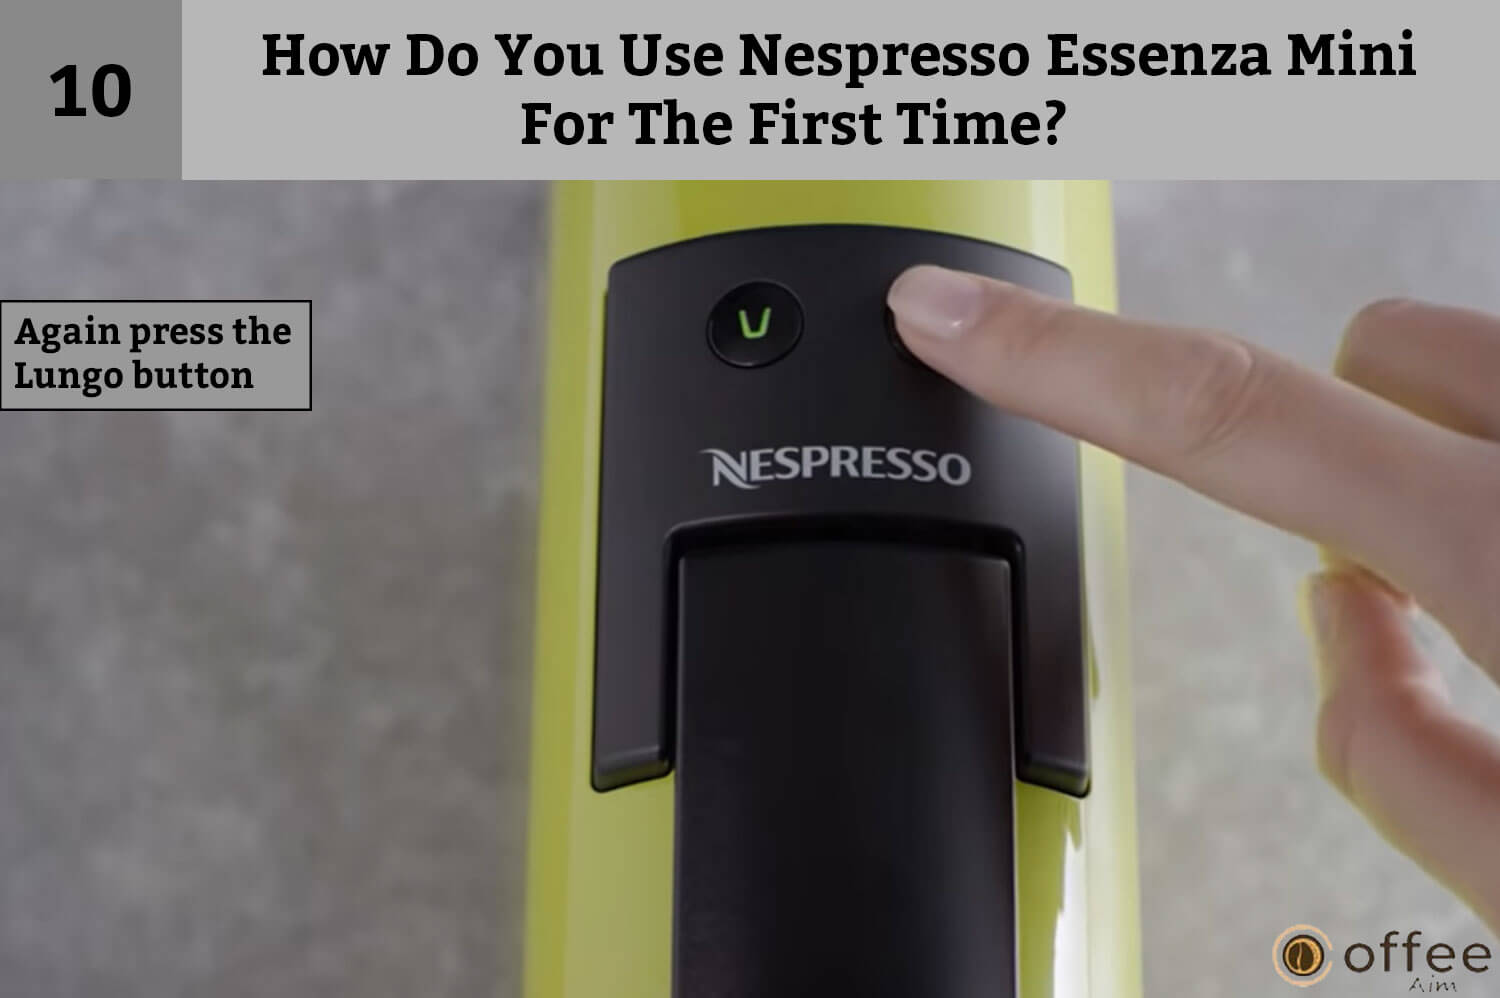 Tenth instruction of How Do You Use Nespresso Essenza Mini For The First Time? is Again press the lungo button.